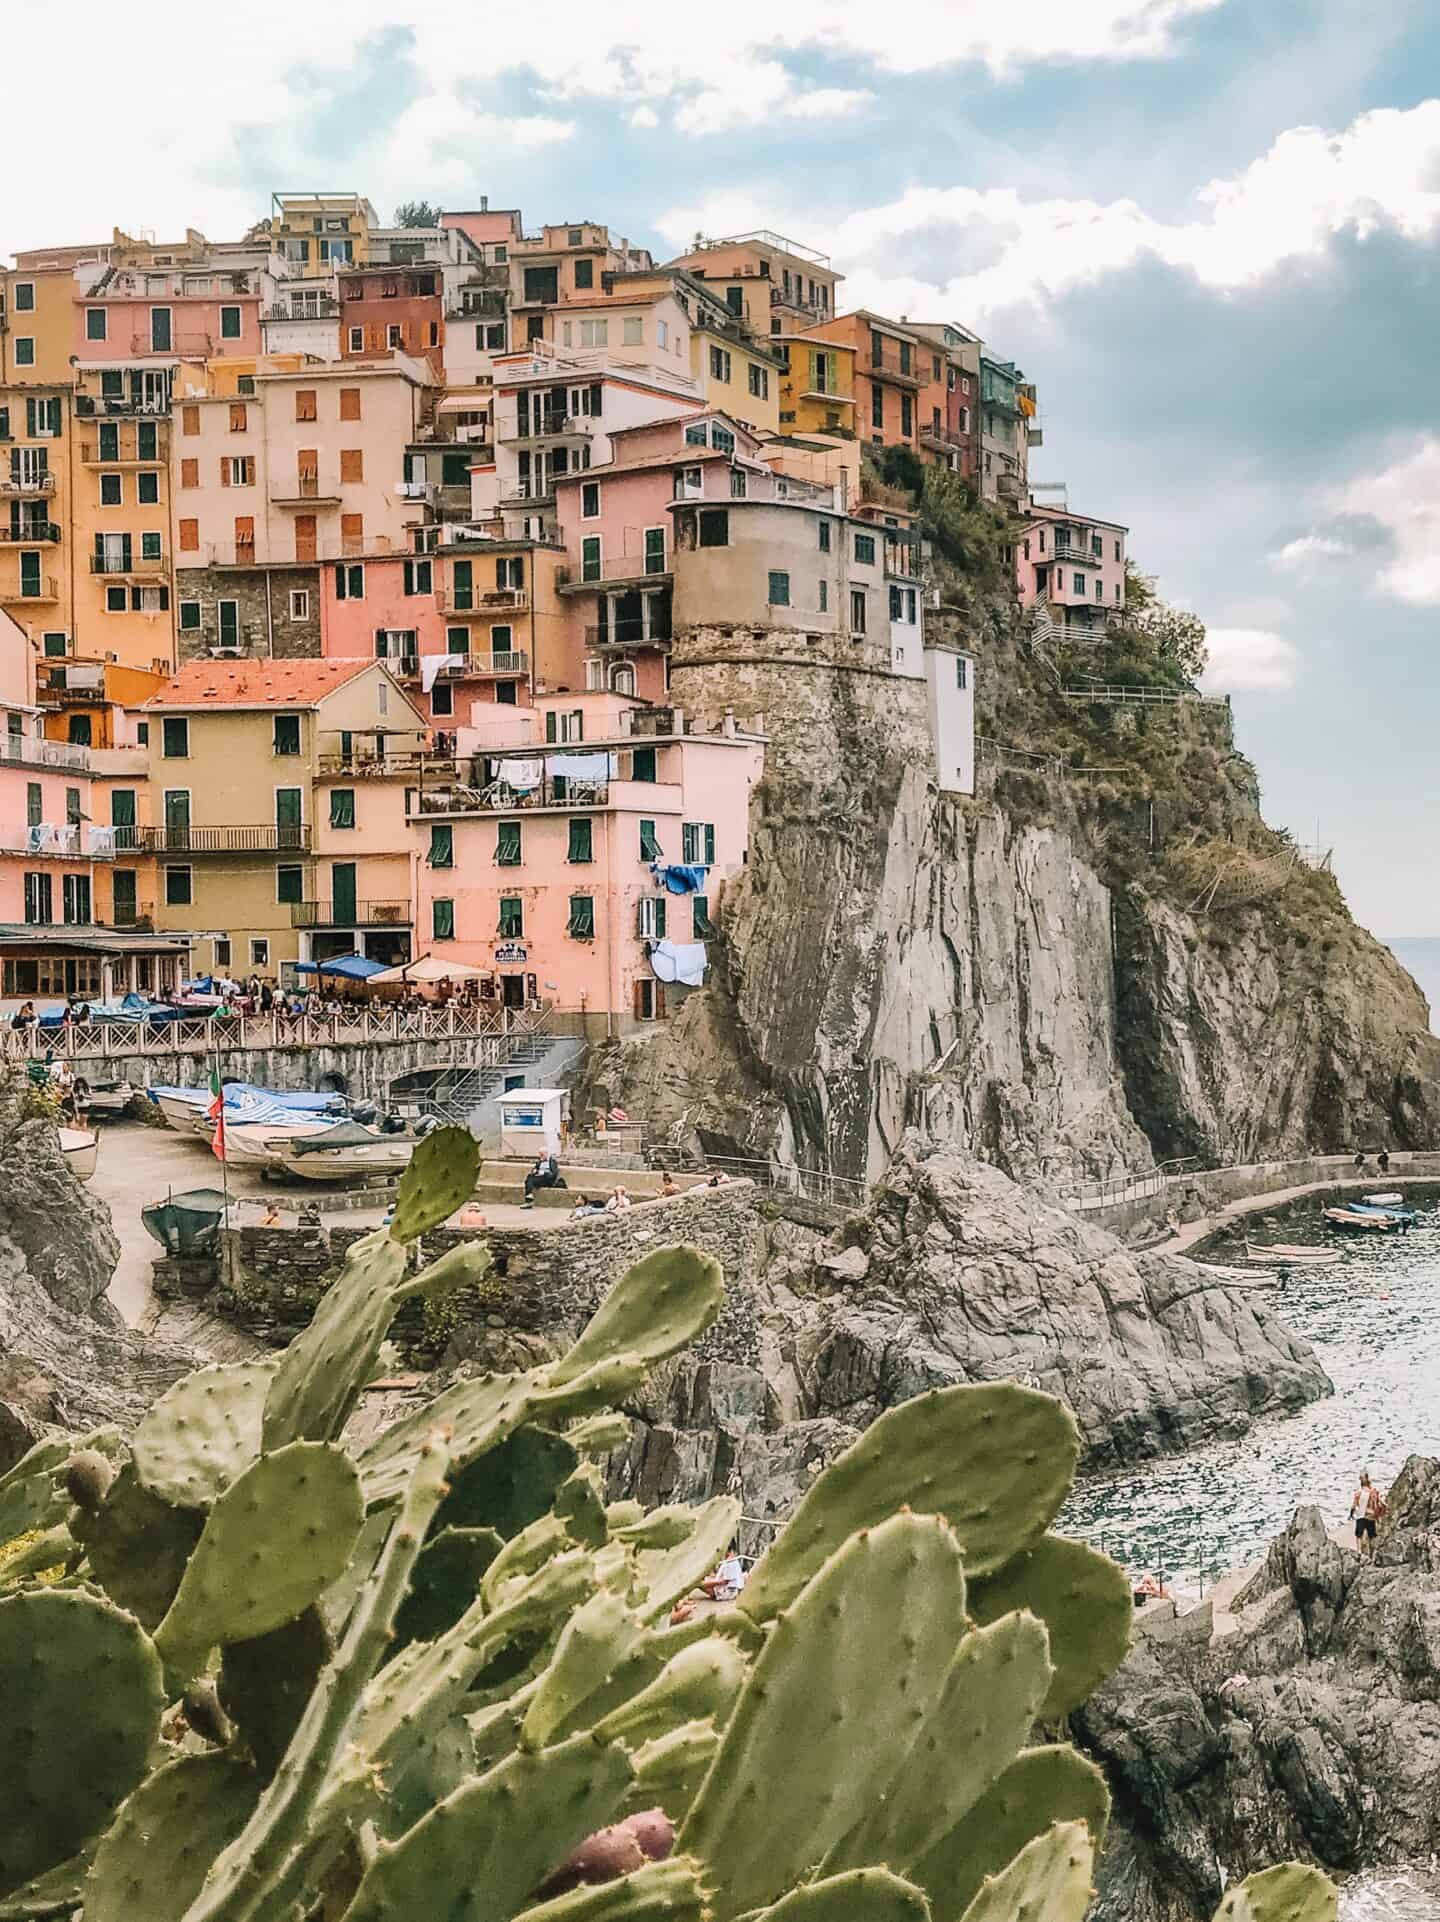 Stunning view of the cliffside houses in Manarola 